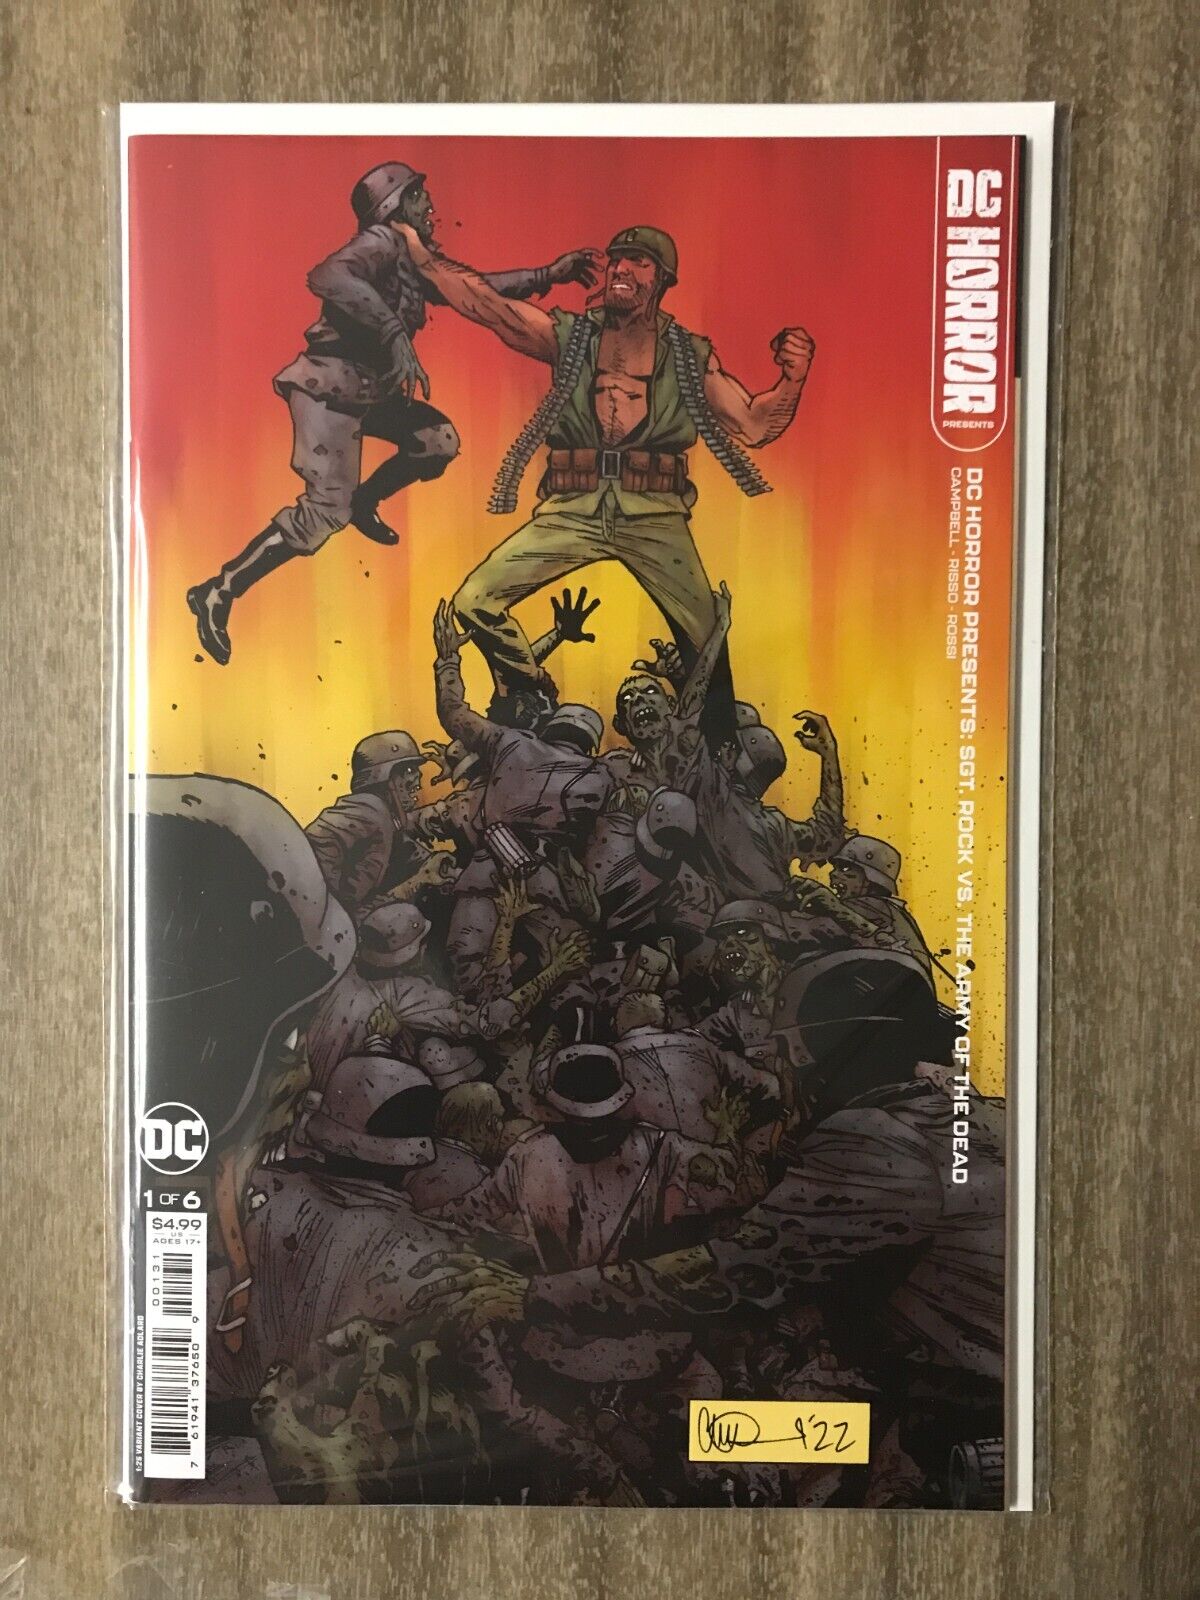 DC Horror Presents Sgt Rock Vs the Army of the Dead #1 Adlard 1:25 Variant NM